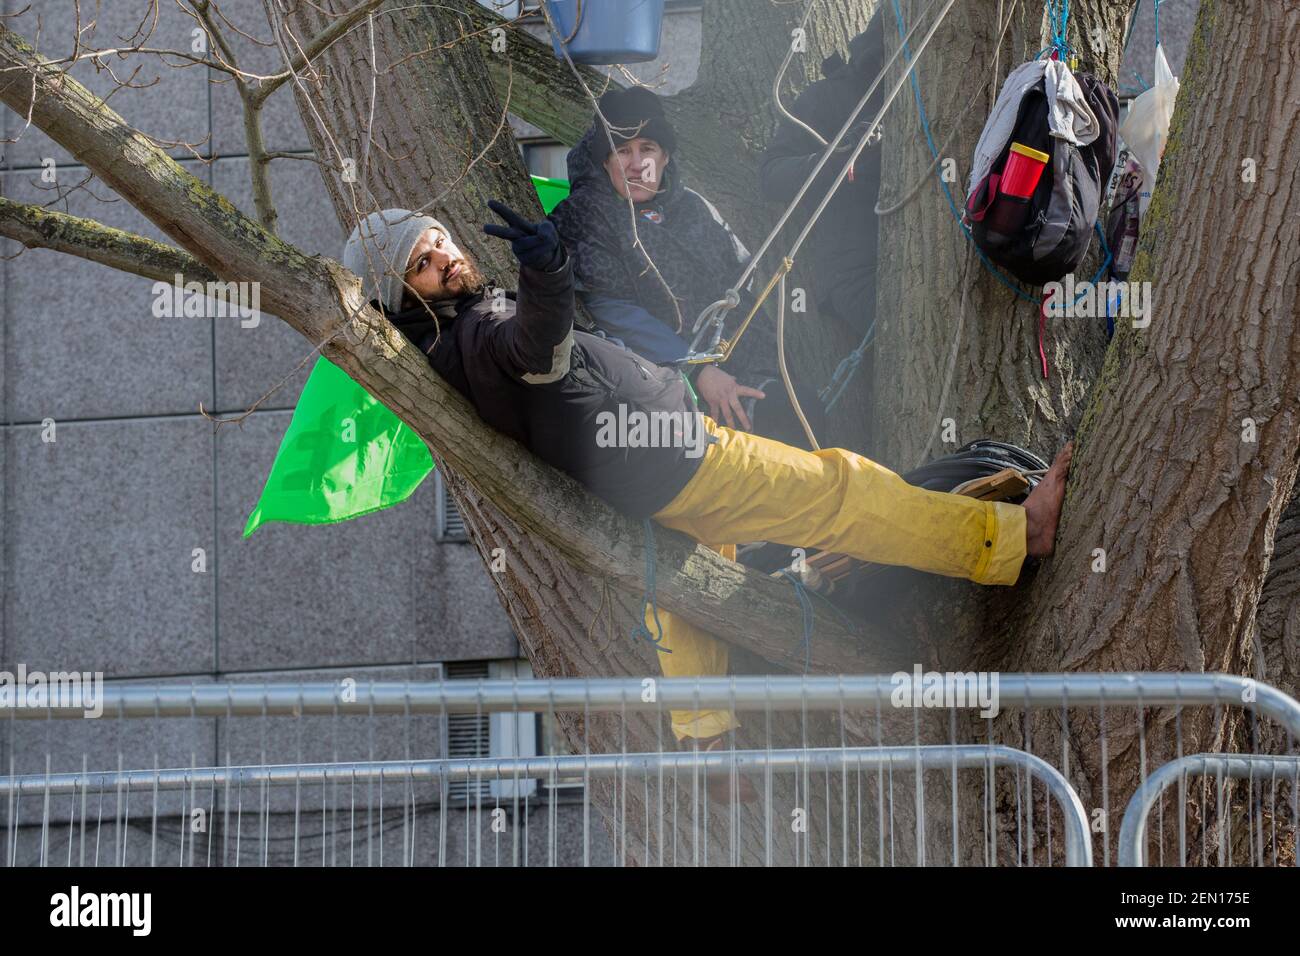 London, UK. 23rd Feb 2021. Tree-huggers Marcus Decker and "Platform Maria" hail from a 100-year-old black poplar tree. It is the second day of “tree-sitting” at London’s York Gardens, Battersea. In a bid to save the tree from felling, three activists have occupied it. The tree was due for felling as part of the local housing regeneration scheme by the council and Taylor Whimpey Homes. Stock Photo